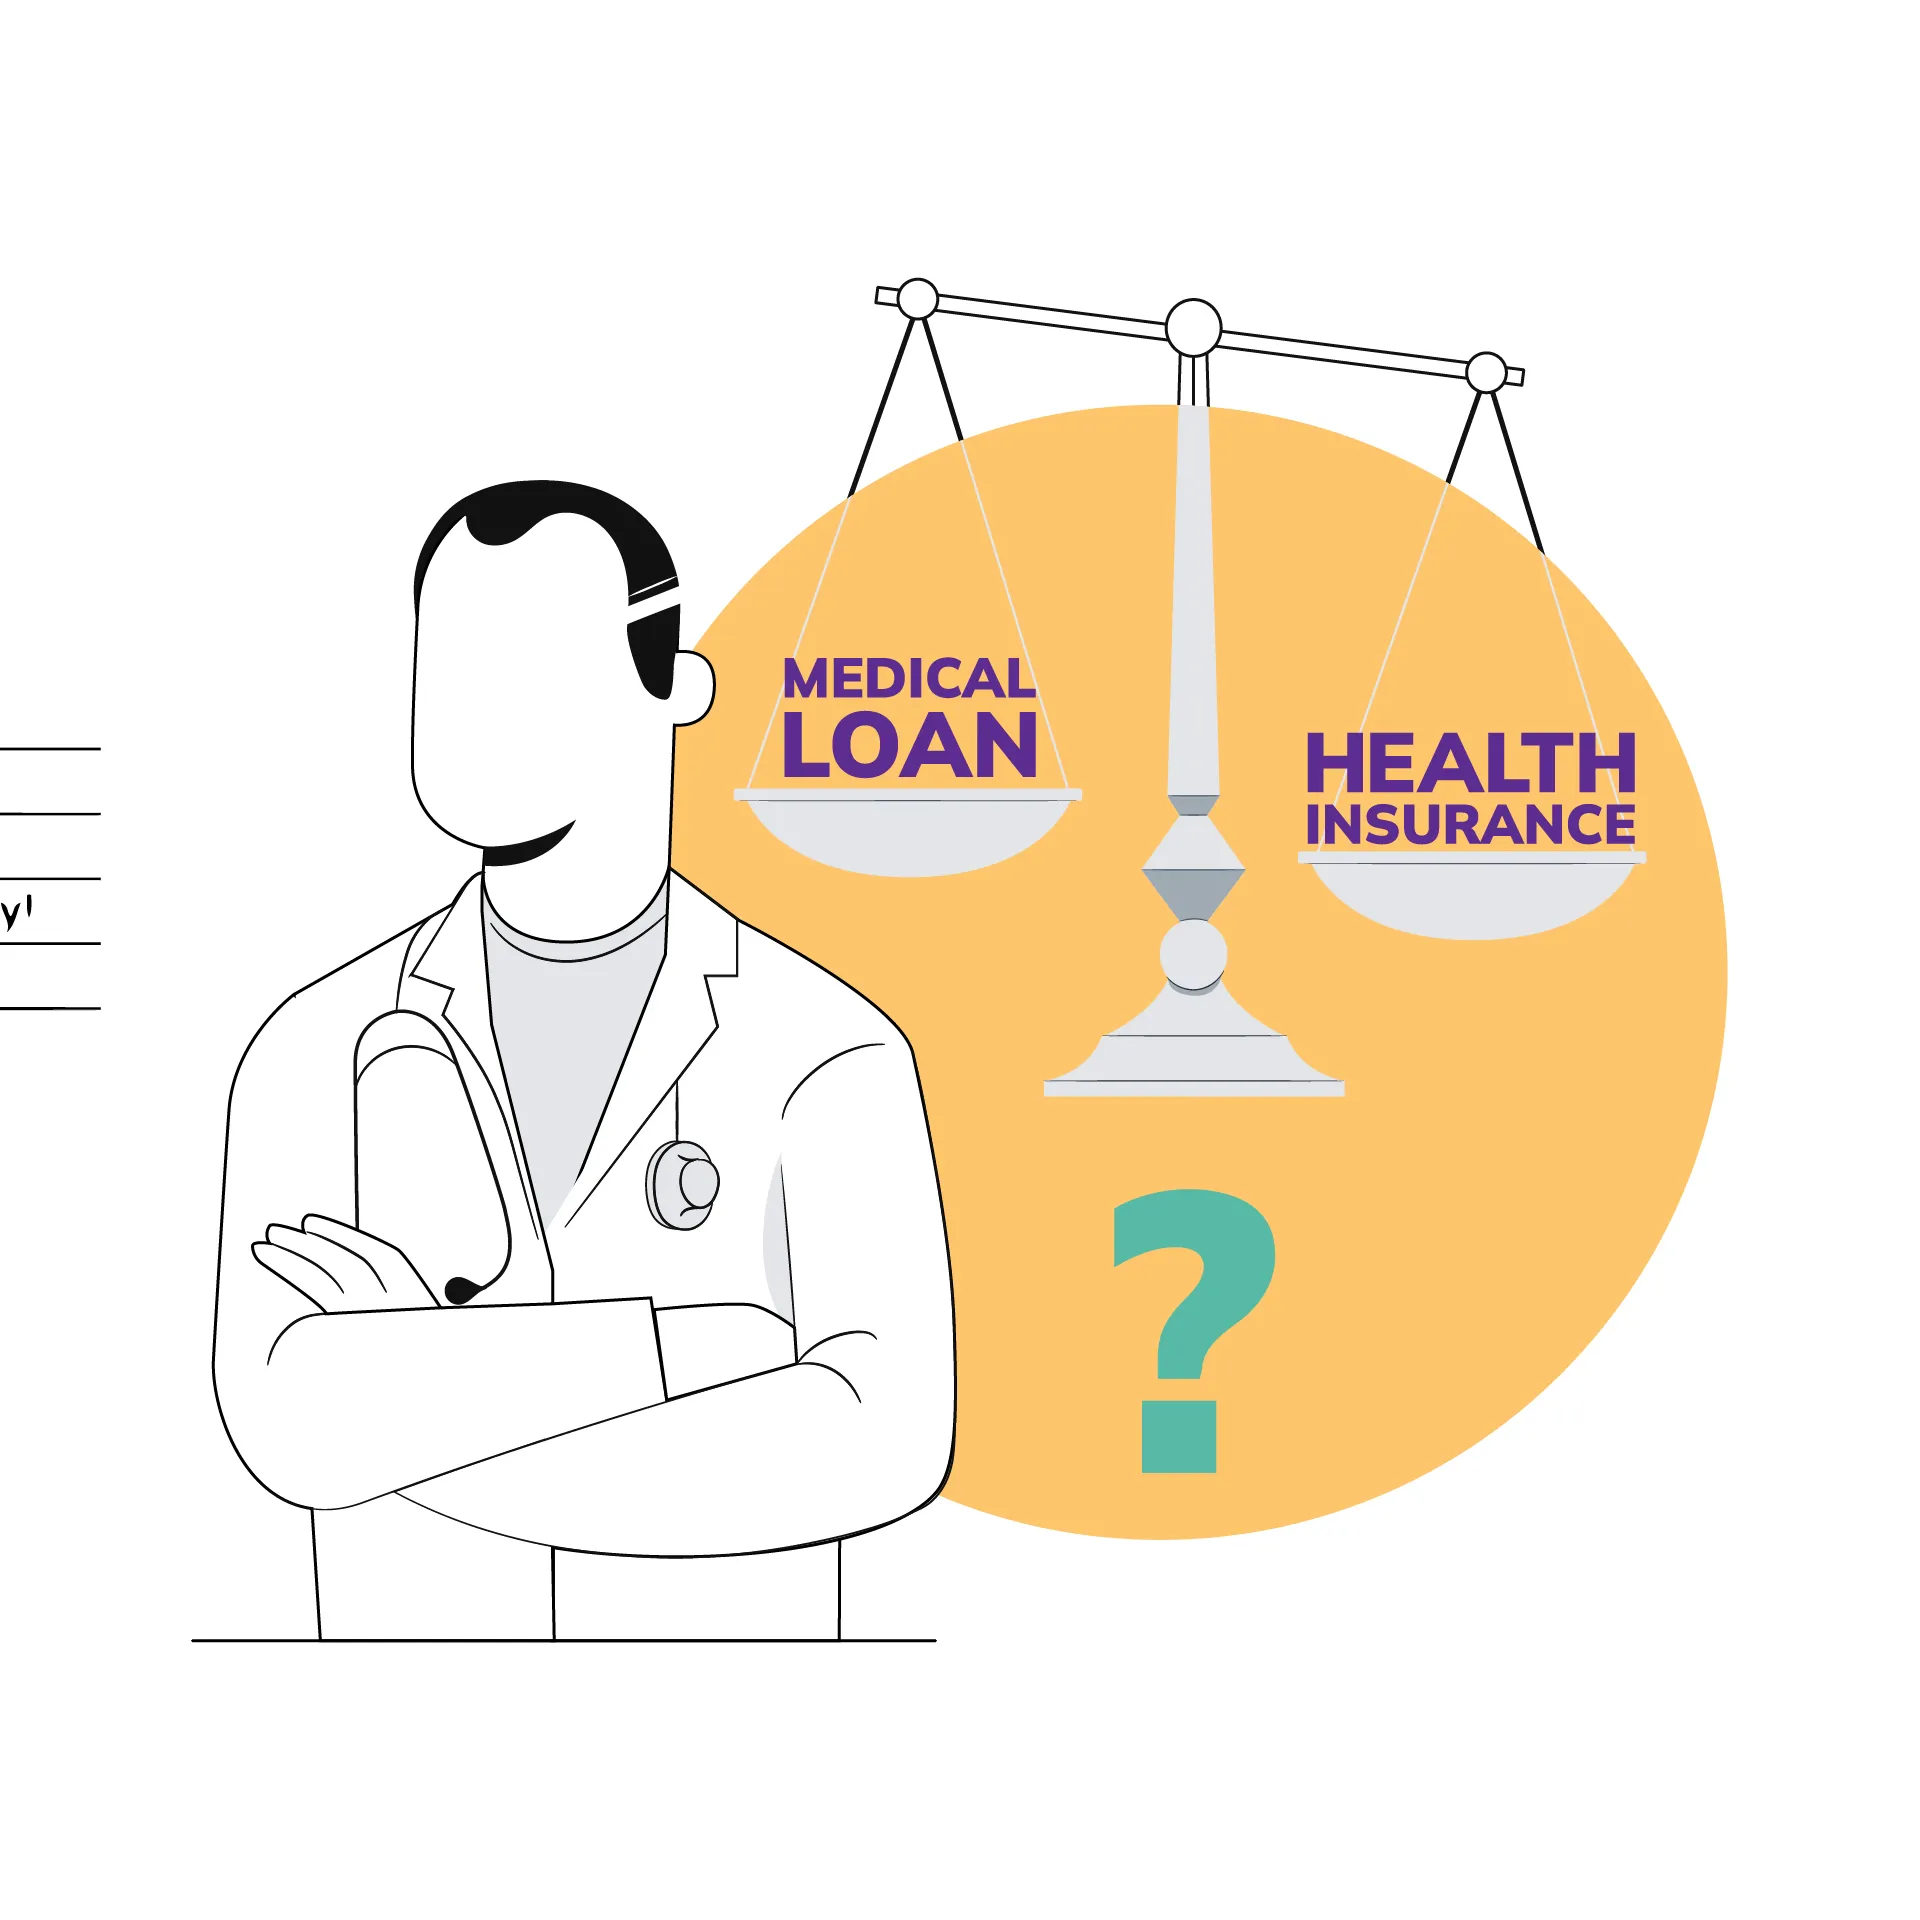 Health Insurance Is Better Than a Medical Loan - 21